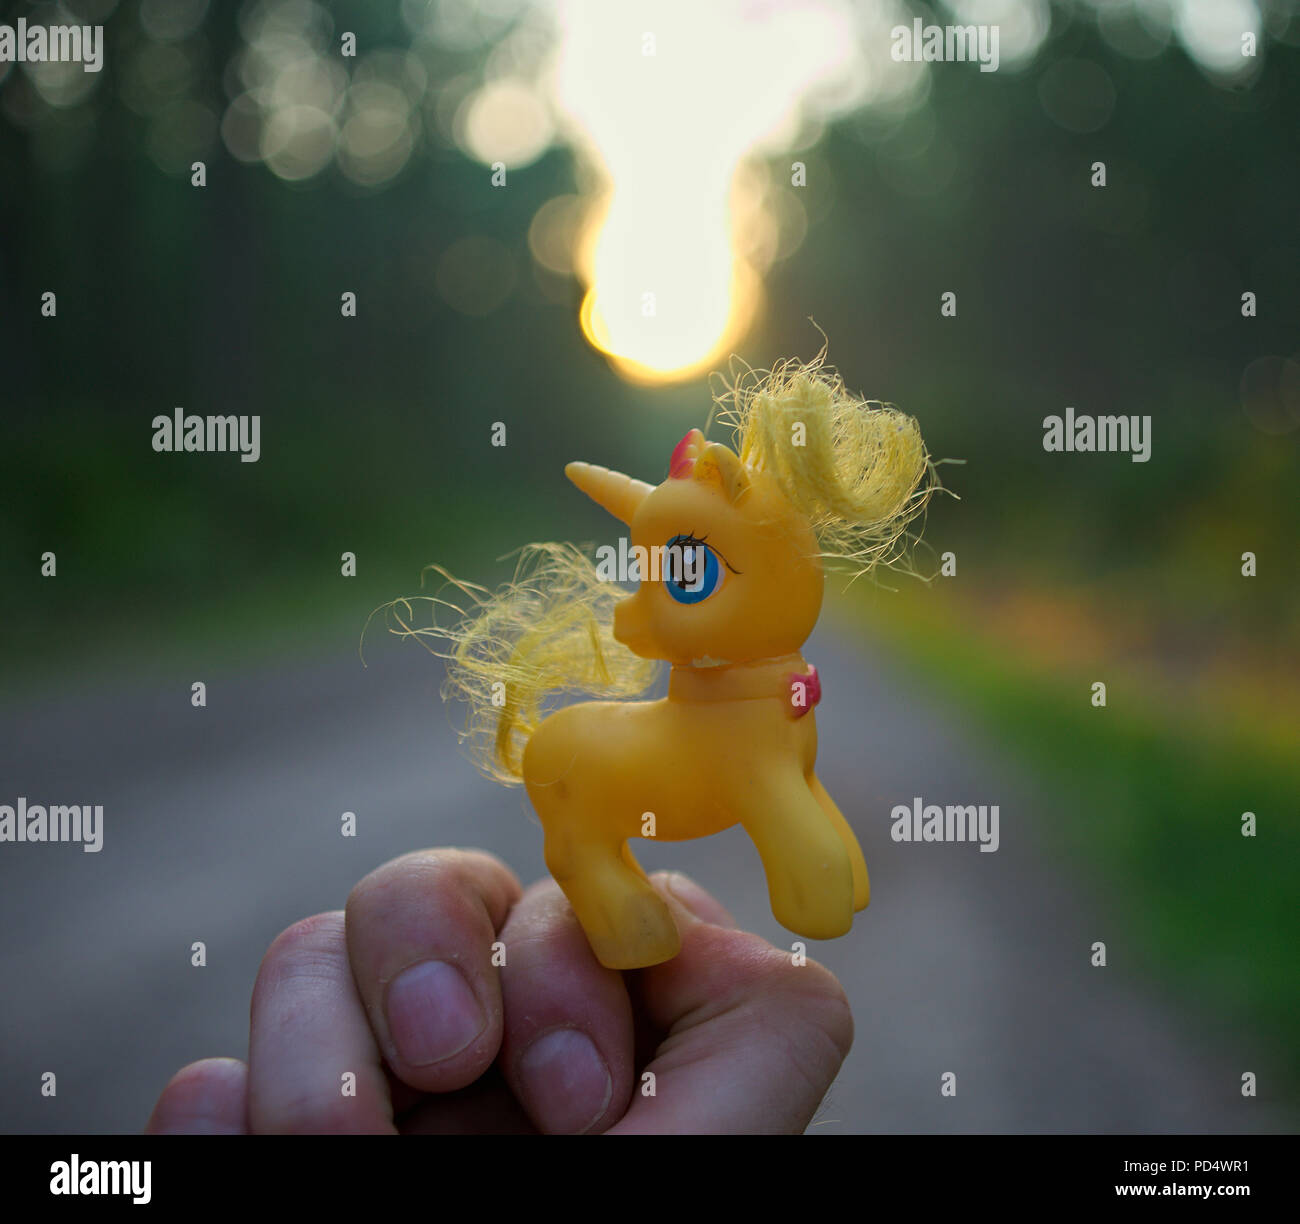 Hand holding yellow toy unicorn, forest road and sunset at background Stock Photo